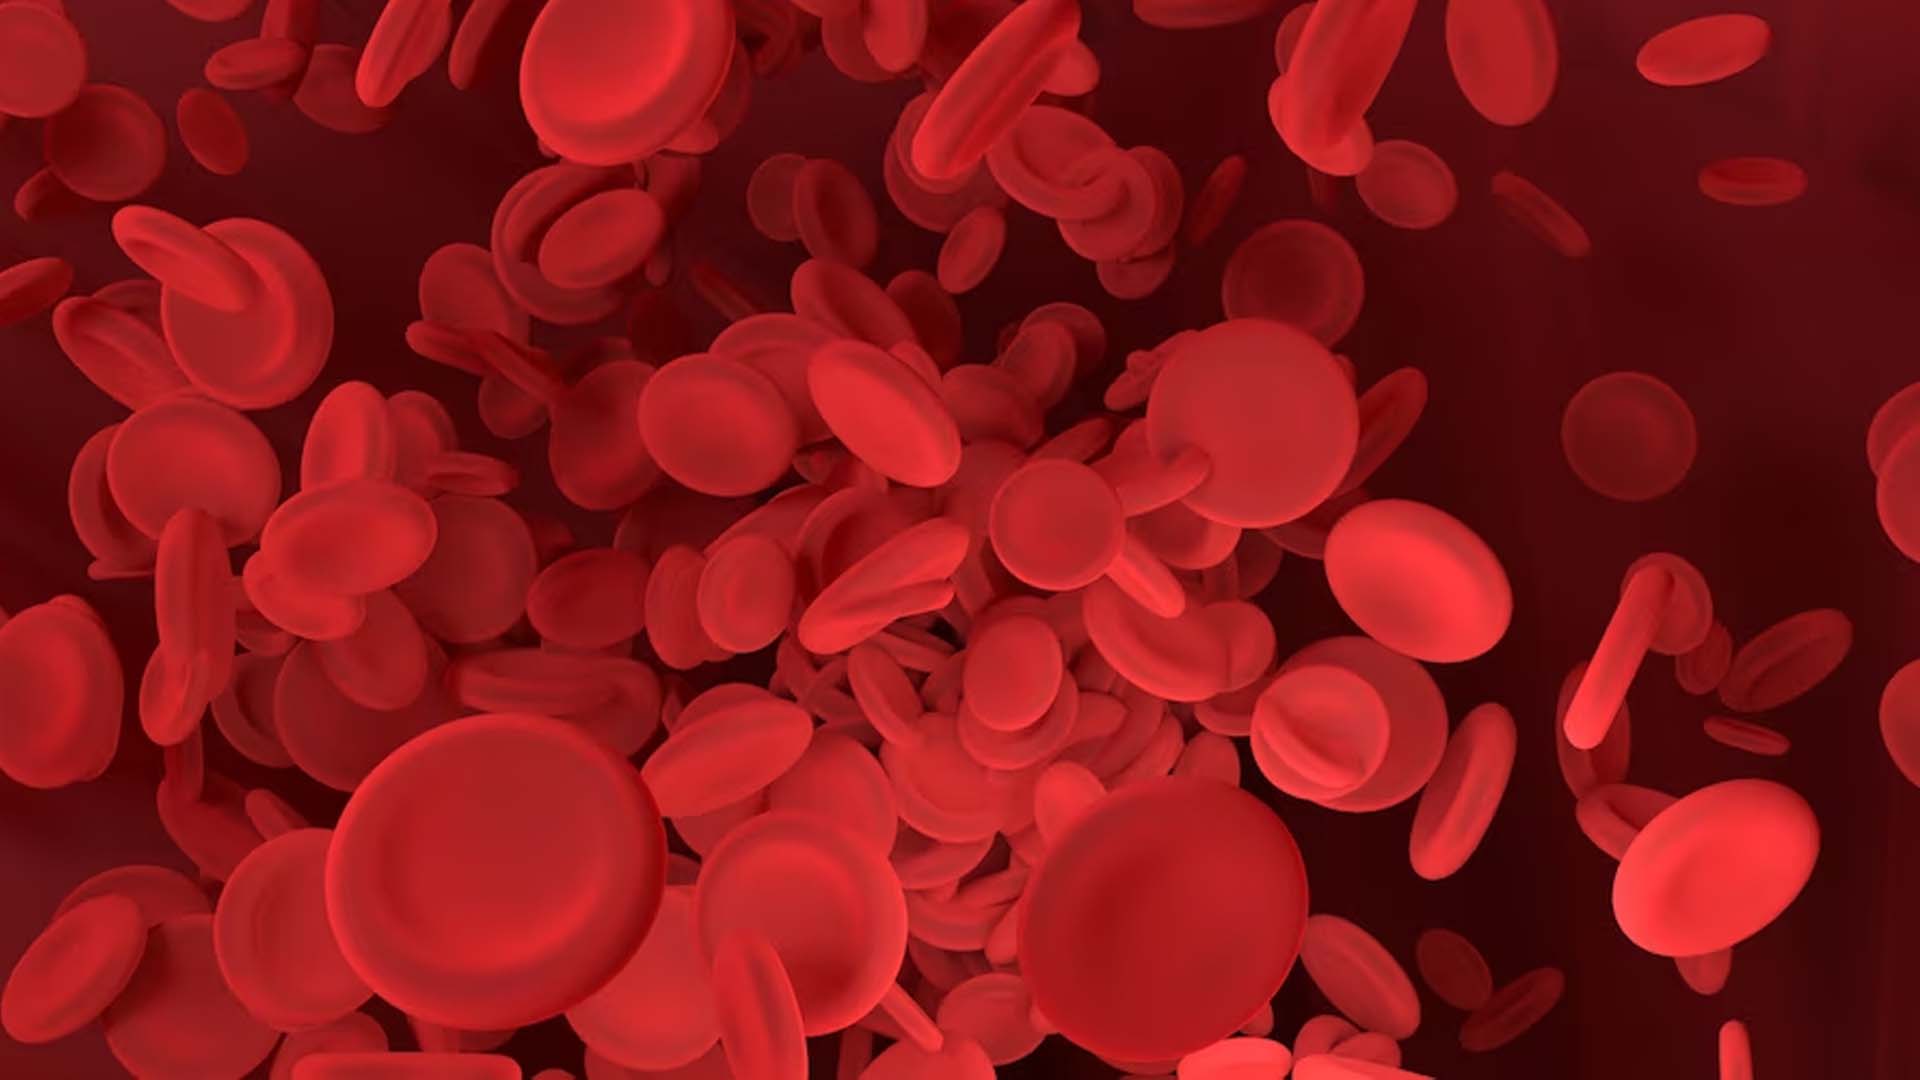 Causes of High Red Blood Cell Count